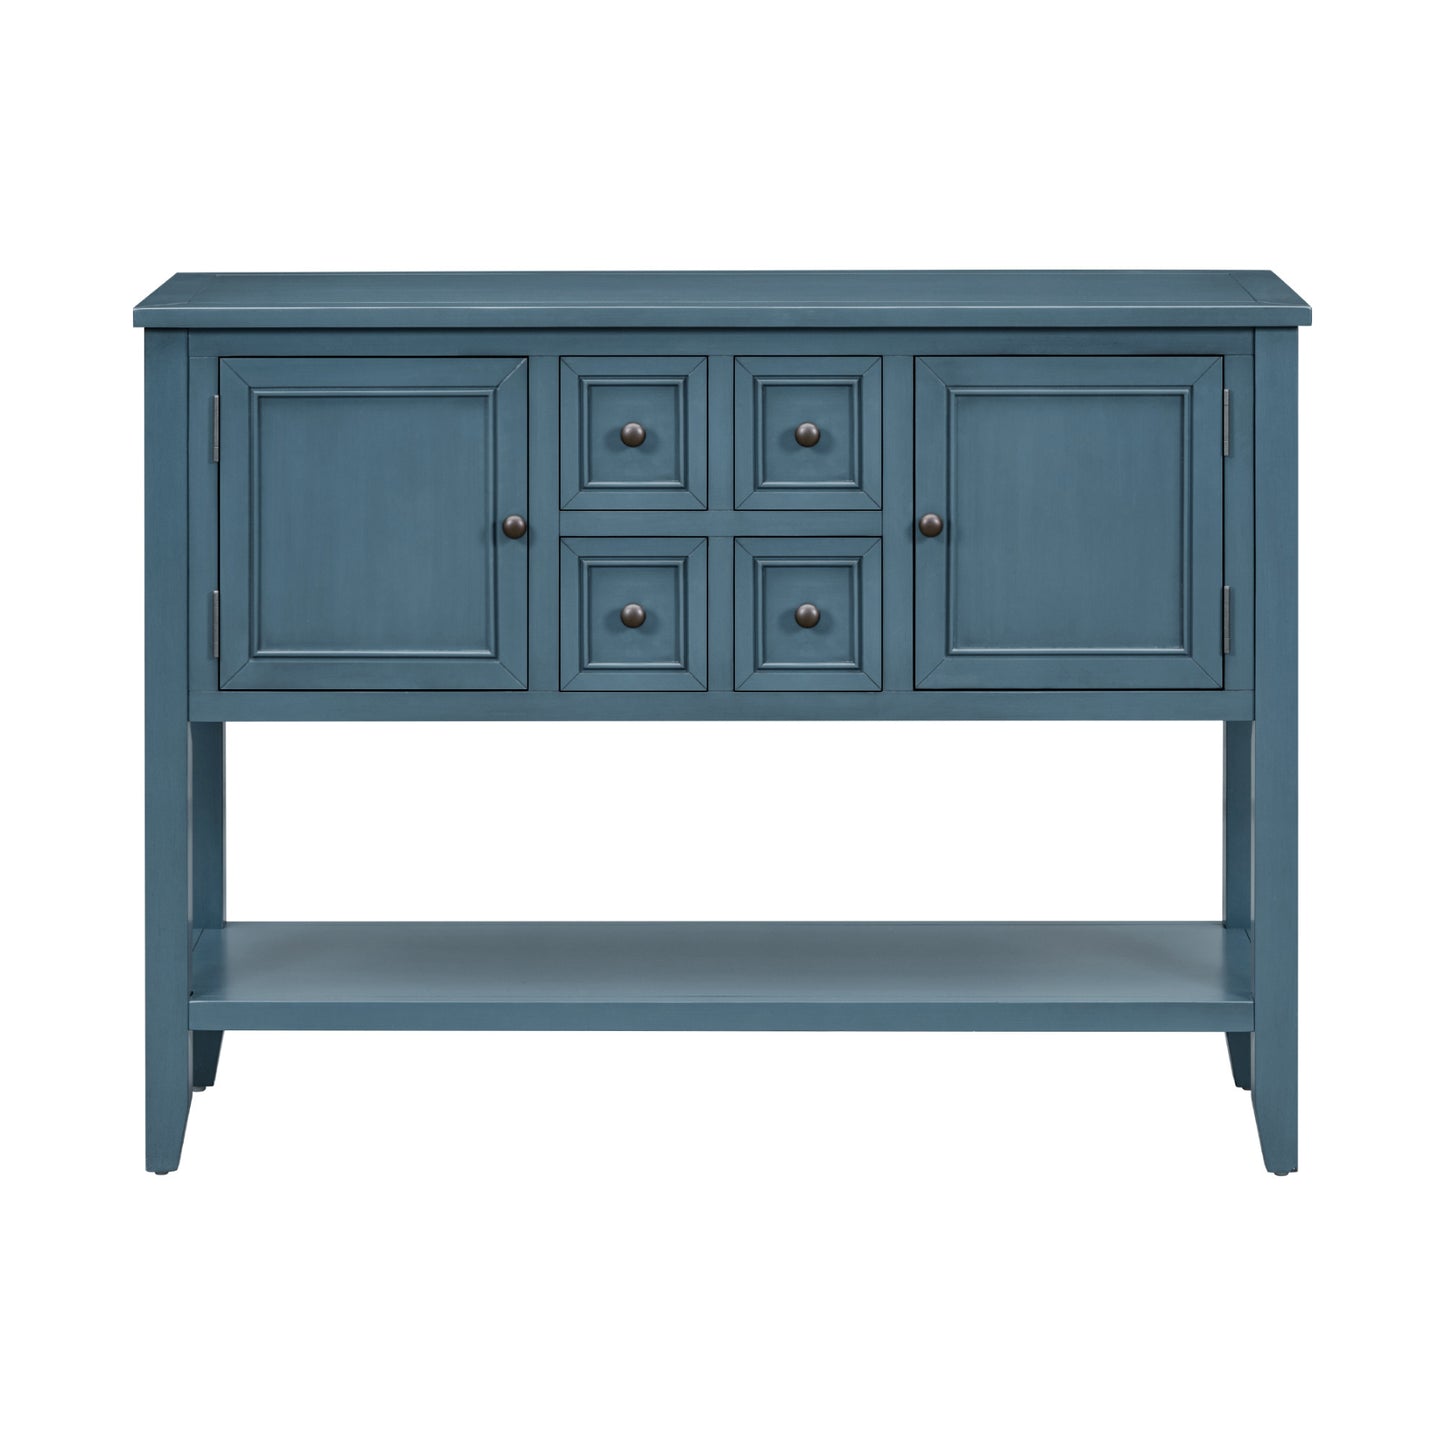 TREXM Cambridge Series Ample Storage Vintage Console Table with Four Small Drawers and Bottom Shelf for Living Rooms, Entrances and Kitchens (Light Navy, OLD SKU: WF190263AAH)